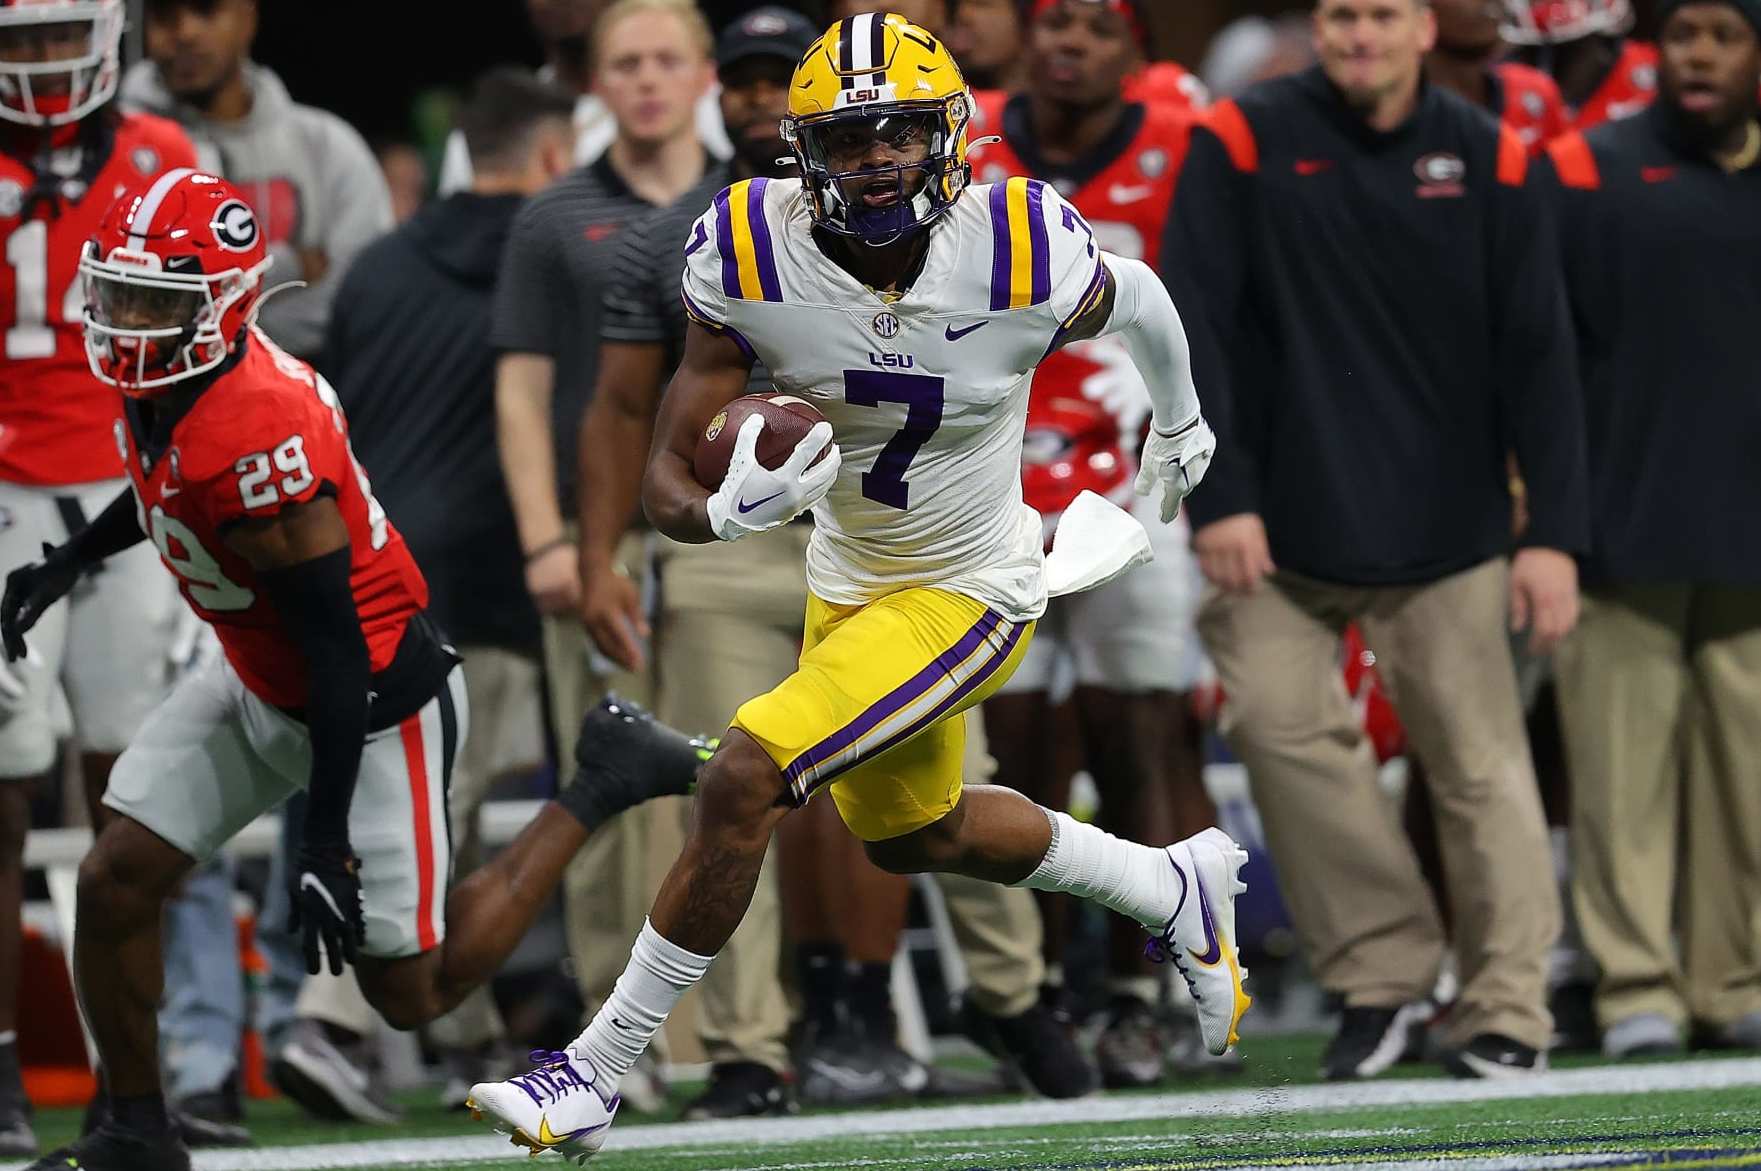 What dictates a fast start for LSU football in 2022?